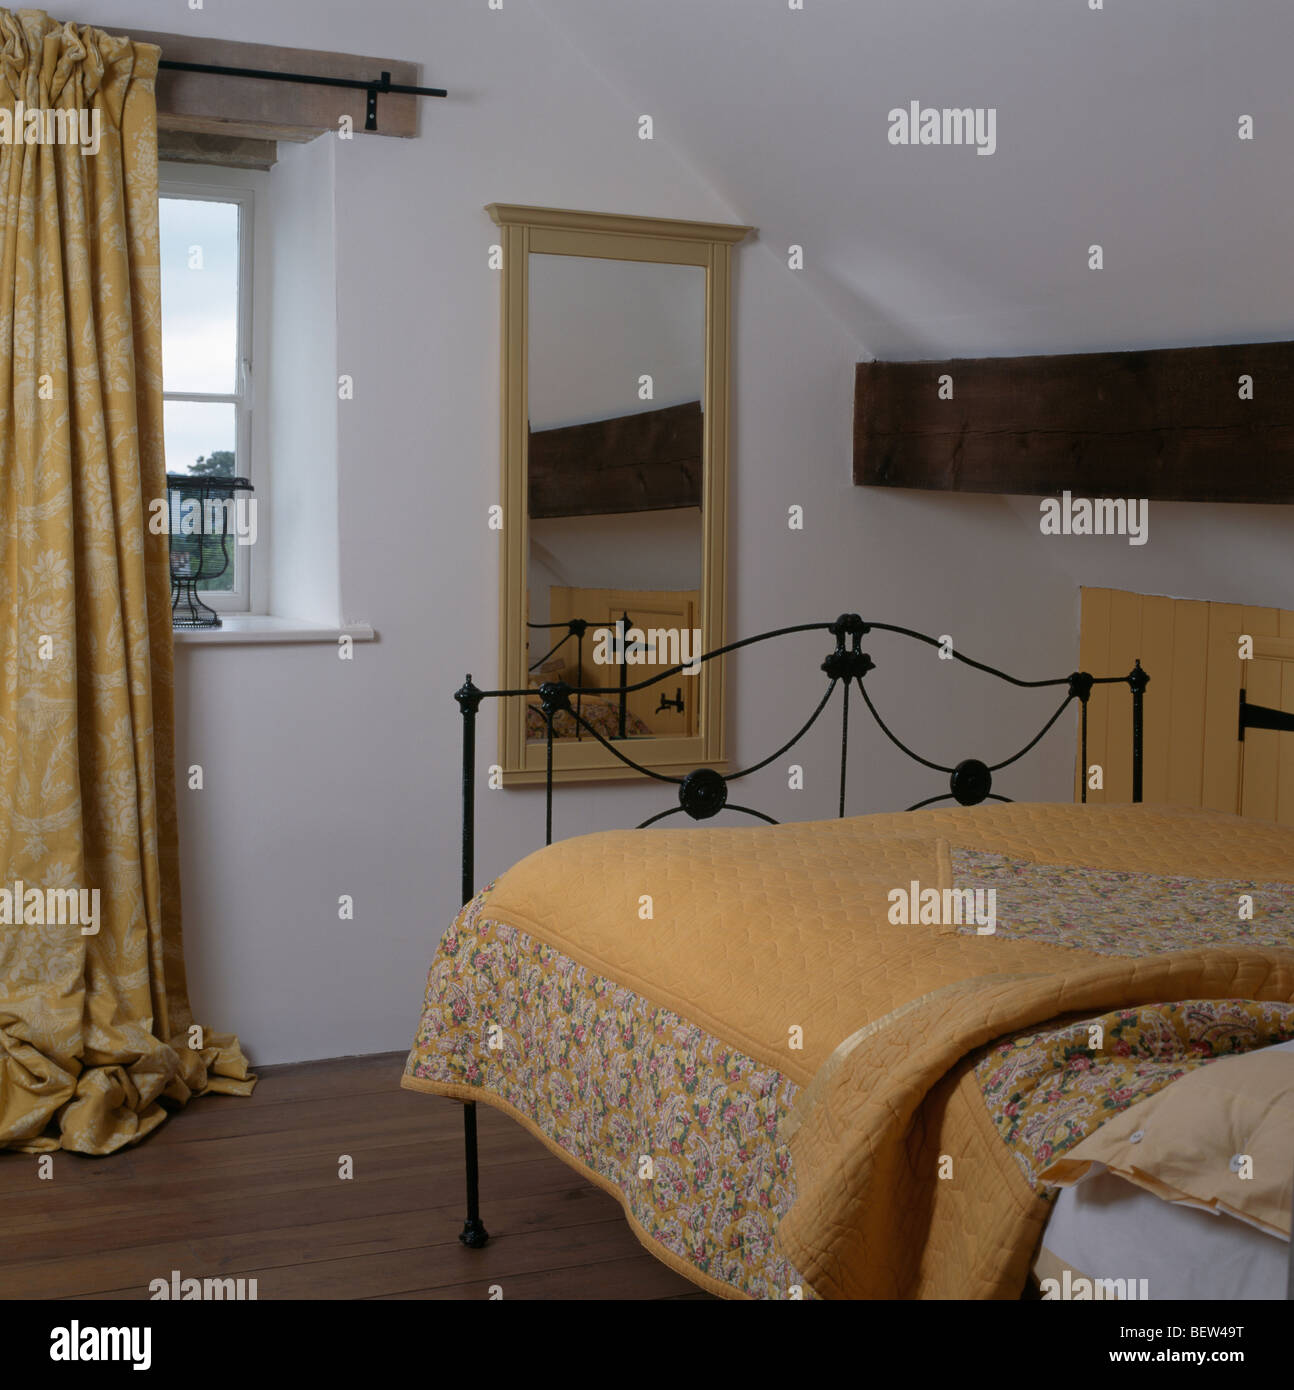 Yellow quilt on iron bed in white cottage bedroom with patterned yellow curtain at window Stock Photo